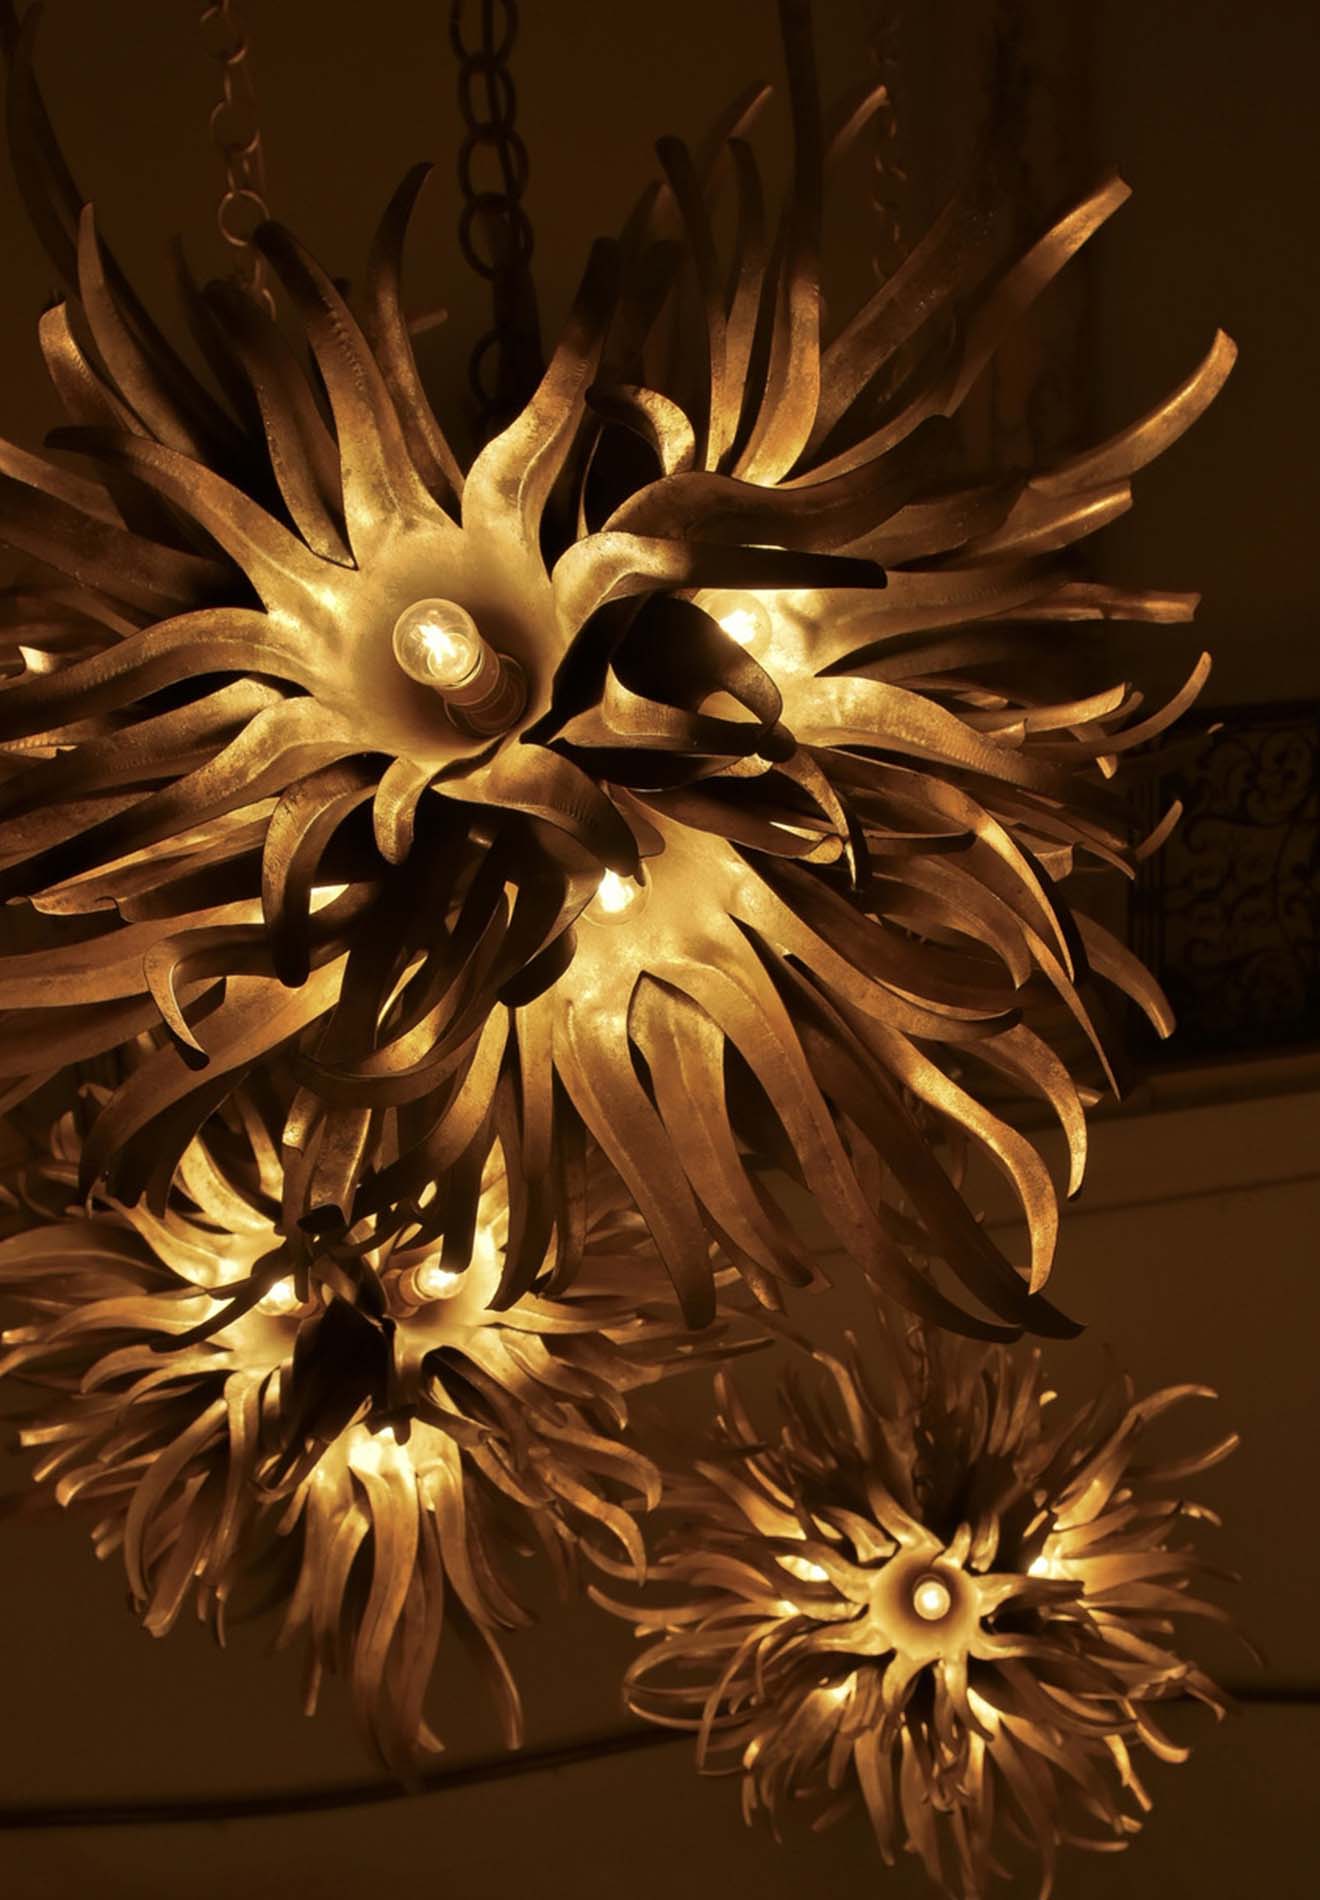 Porta Romana Urchin ceiling light featured in the Royal Academy